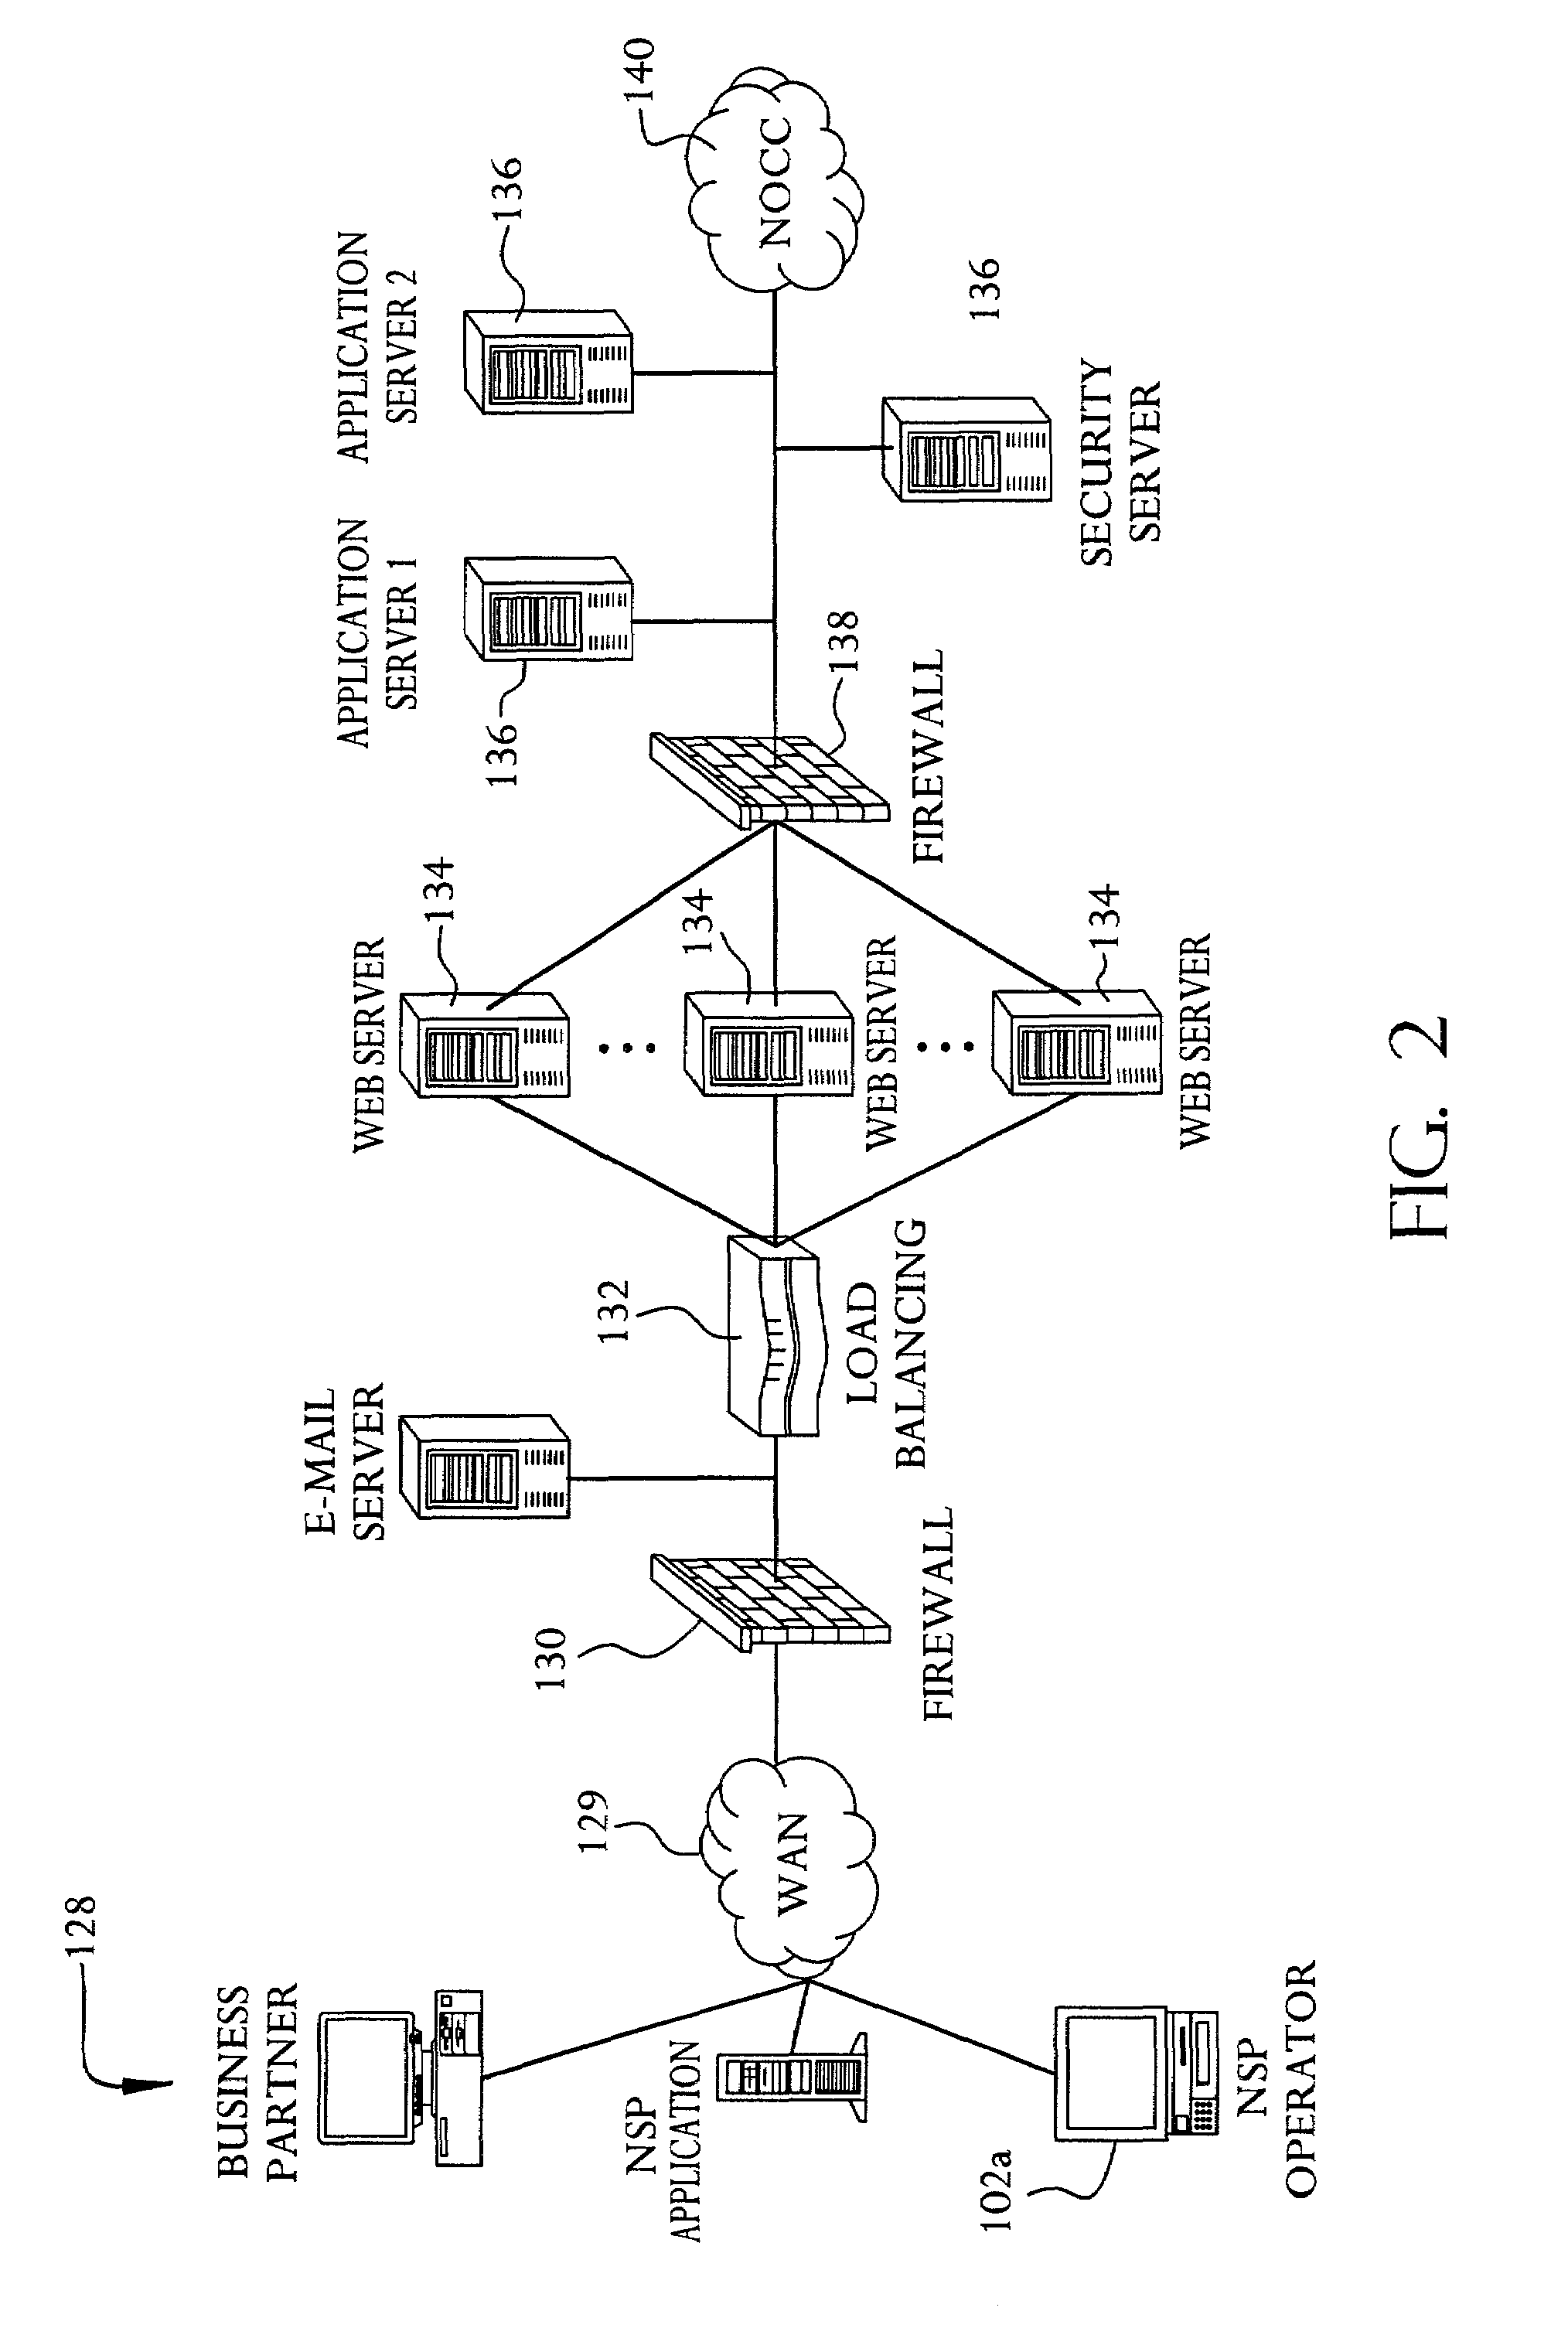 Method and apparatus for allocating data communications resources in a satellite communications network